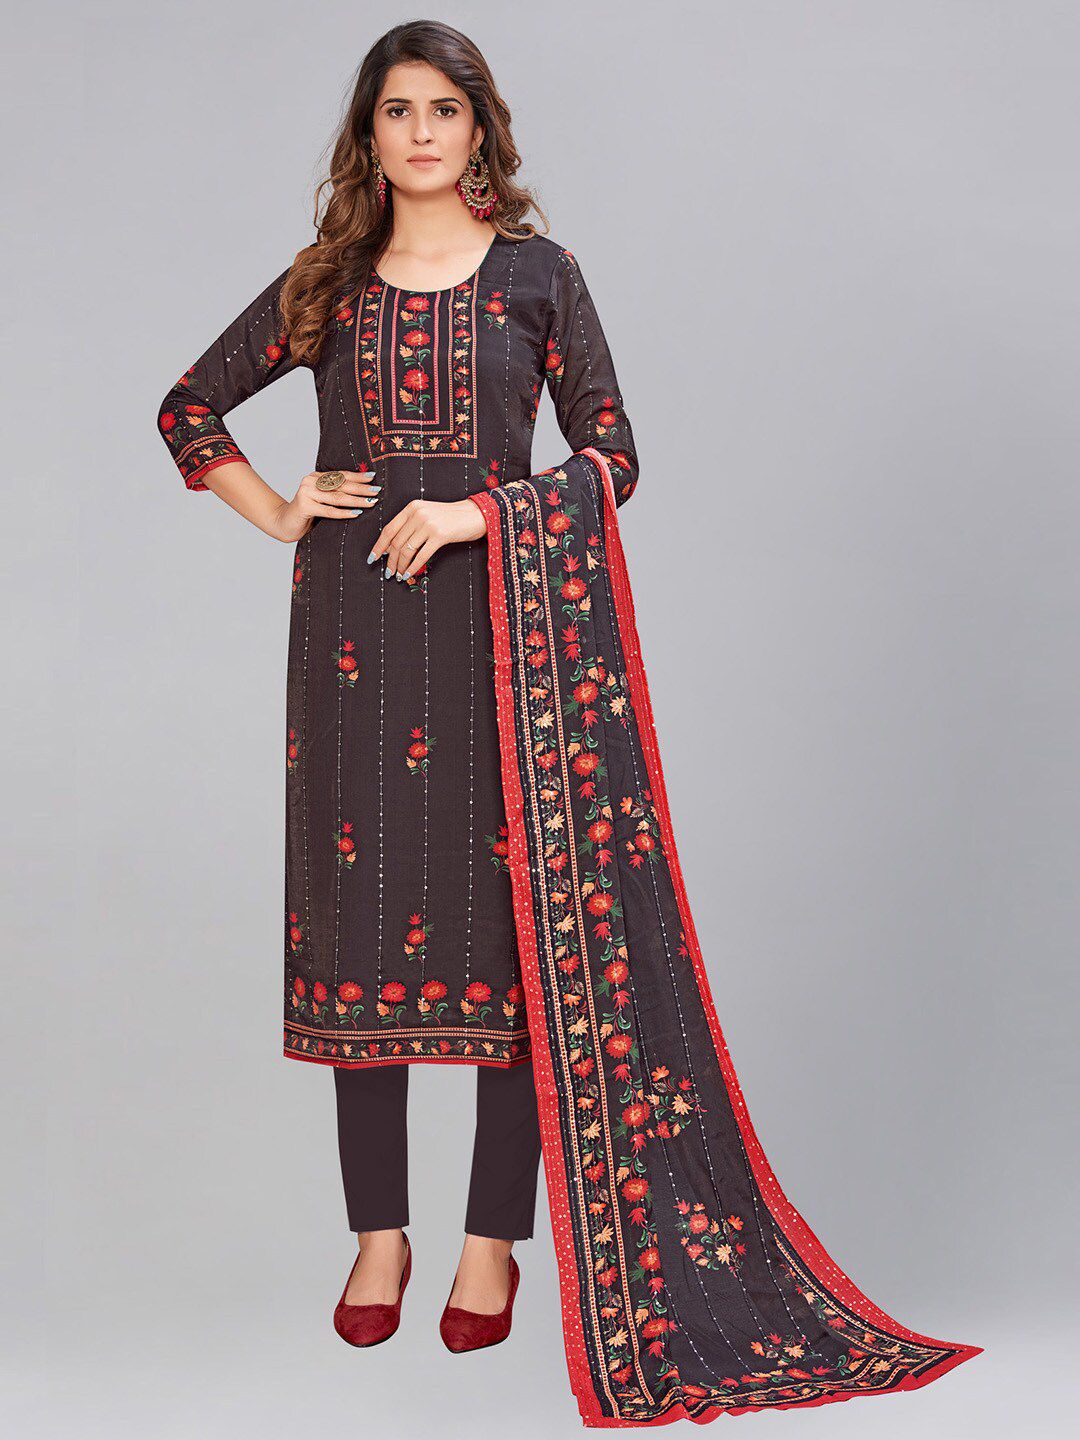 AYKA CLOTHINGS Black & Red Printed Viscose Rayon Unstitched Dress Material Price in India